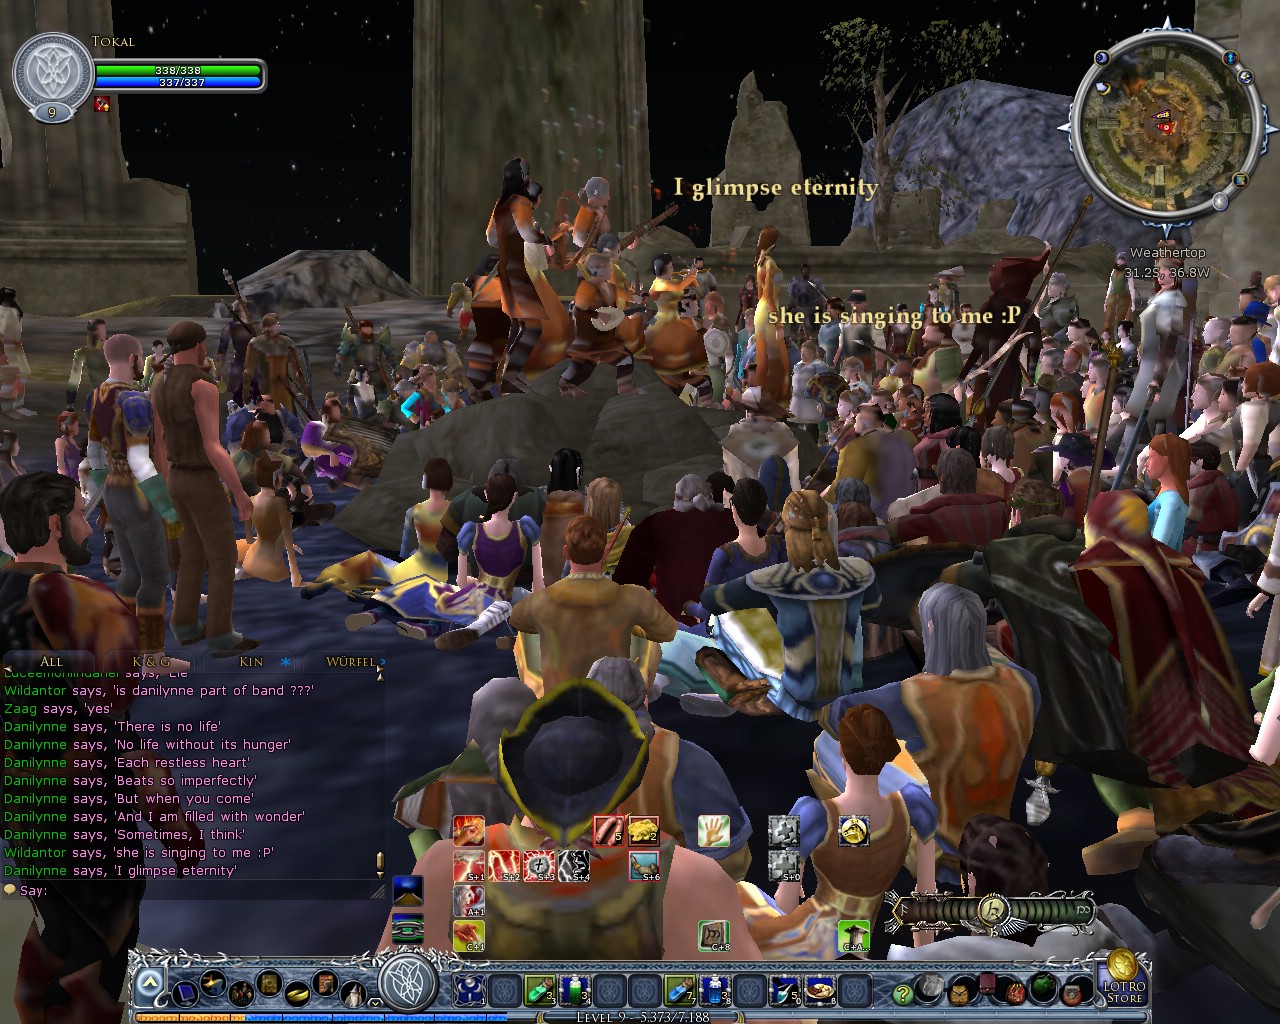 Image: The "Eriador Music Society" playing their tunes 03